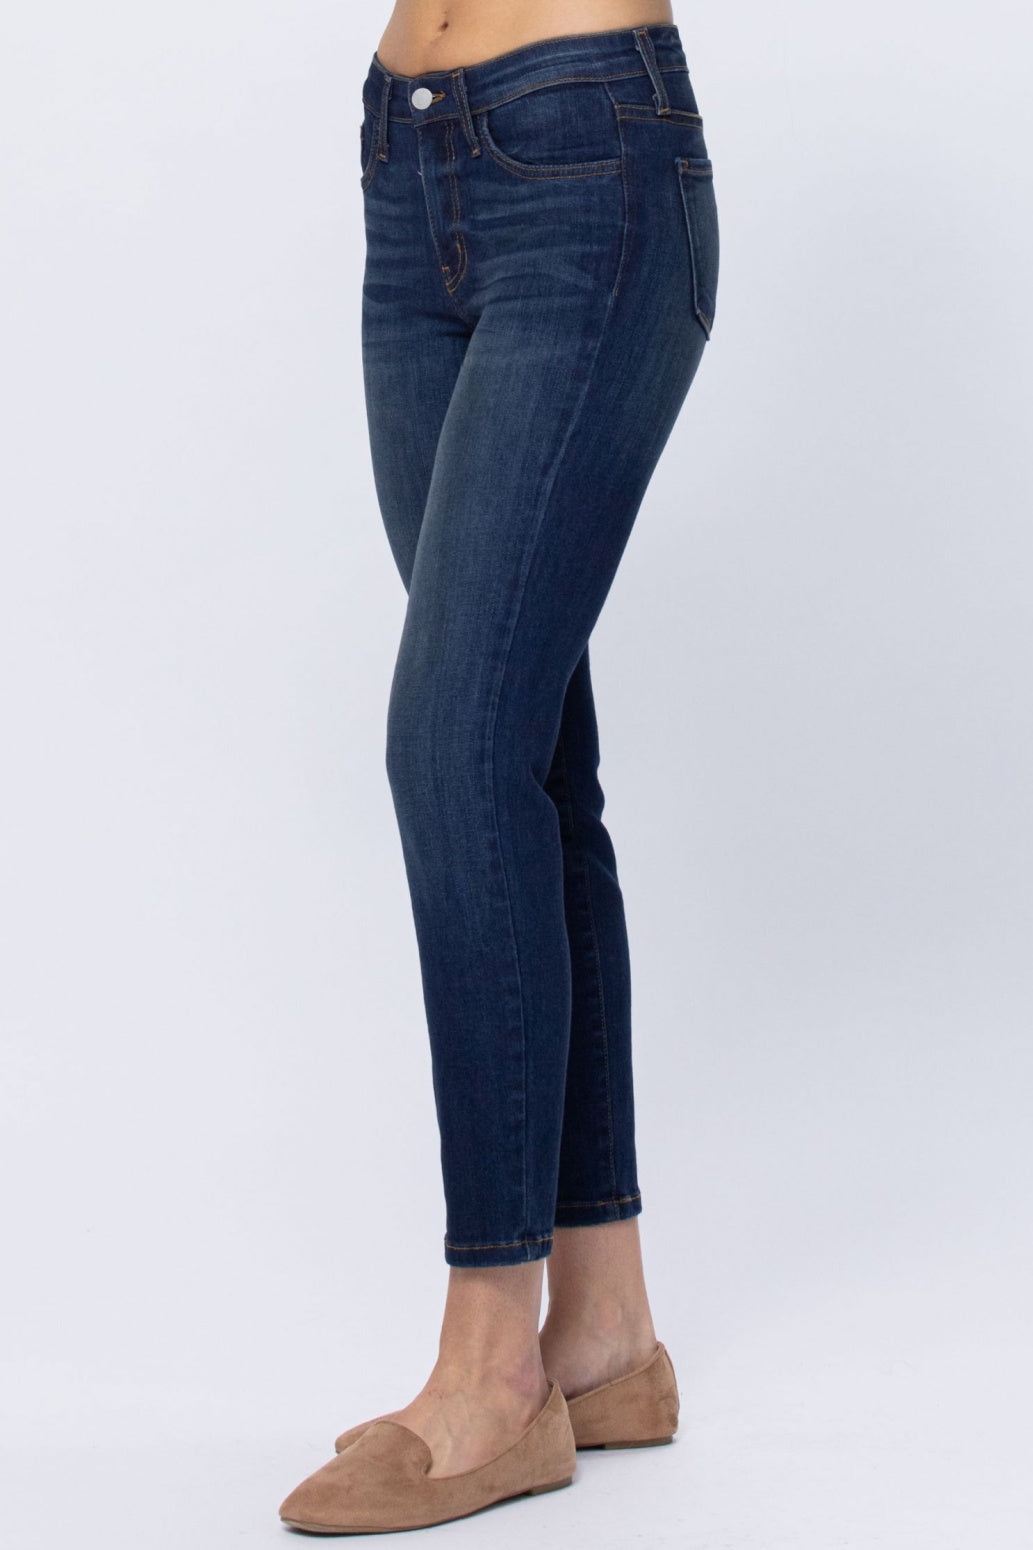 Judy Blue Handsand Relaxed Fit Jeans